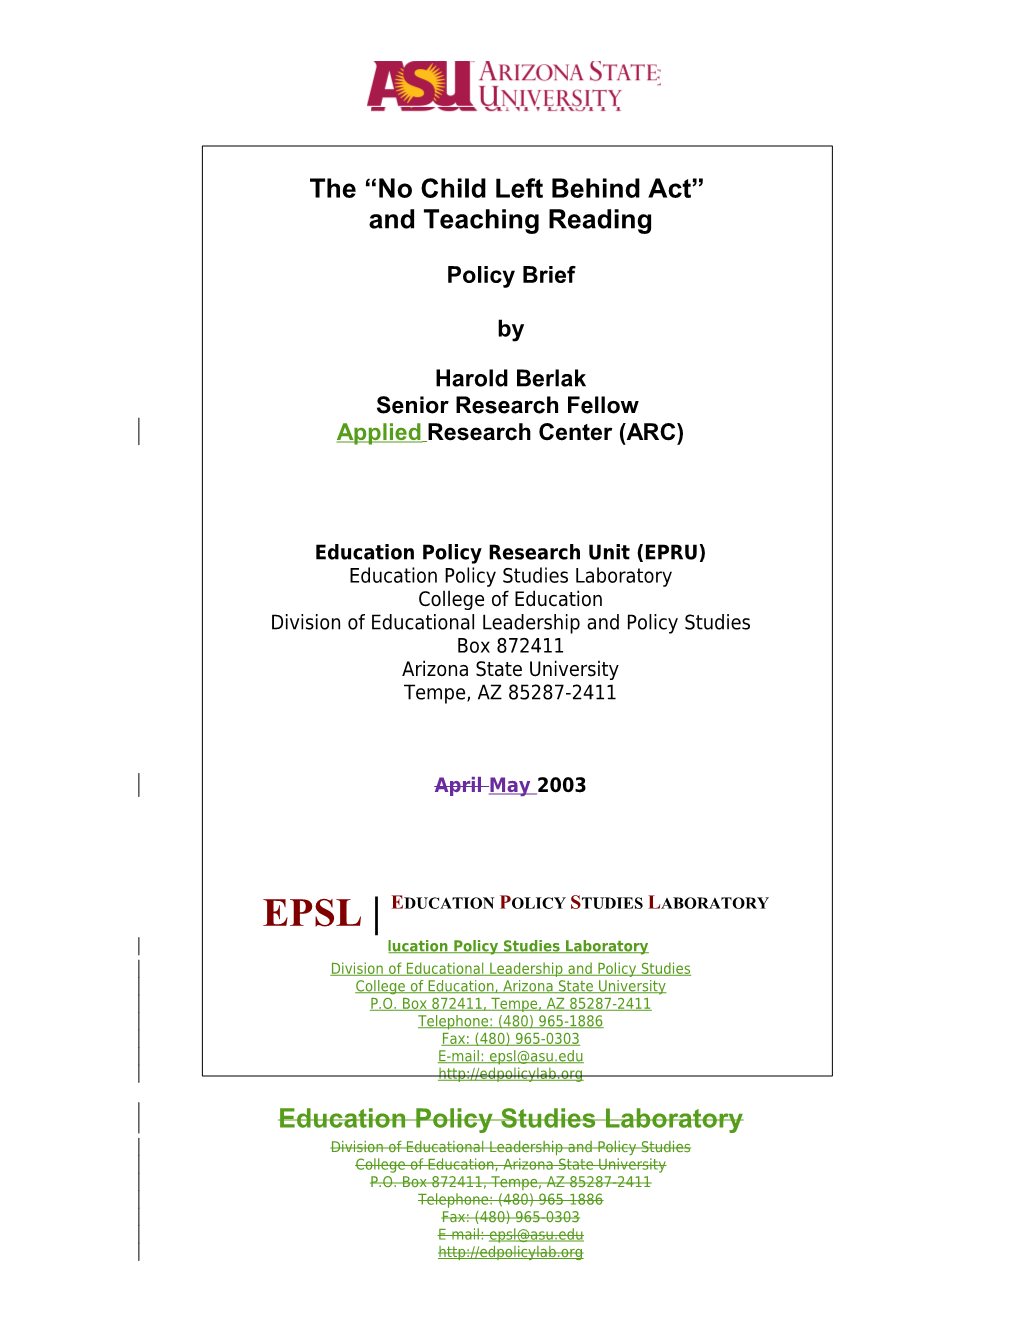 The No Child Left Behind Act and Teaching Reading